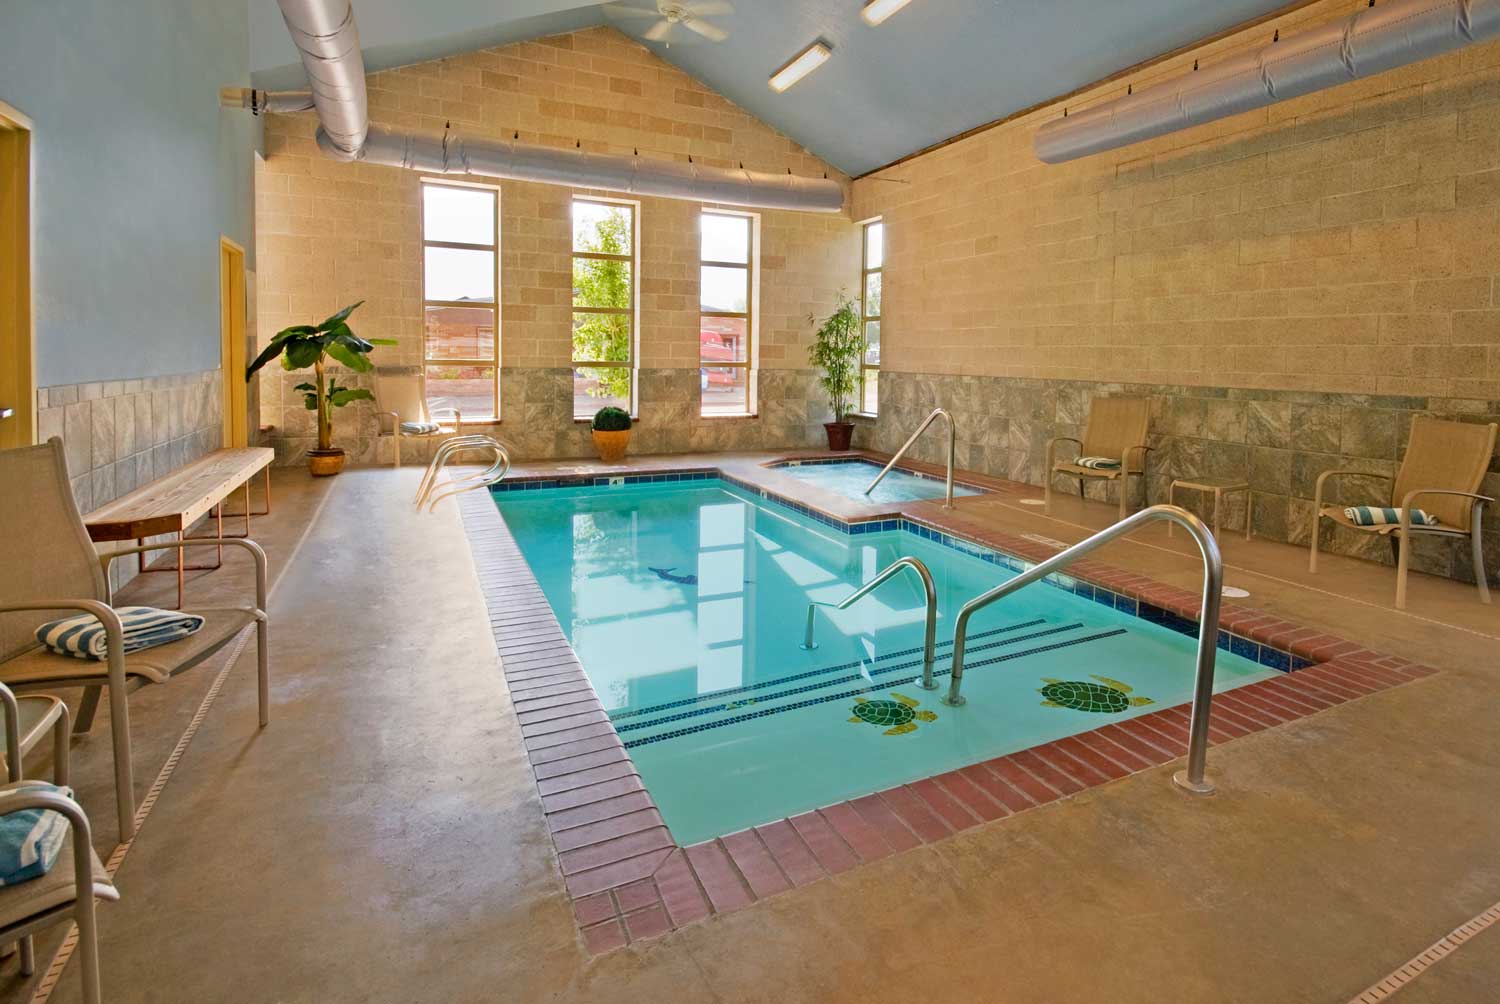 Small Indoor Swimming Pool Design Ideas With Pure Water Best Tile Sitting Space Gray Ceiling Best Wall And Long Window  Pool Design